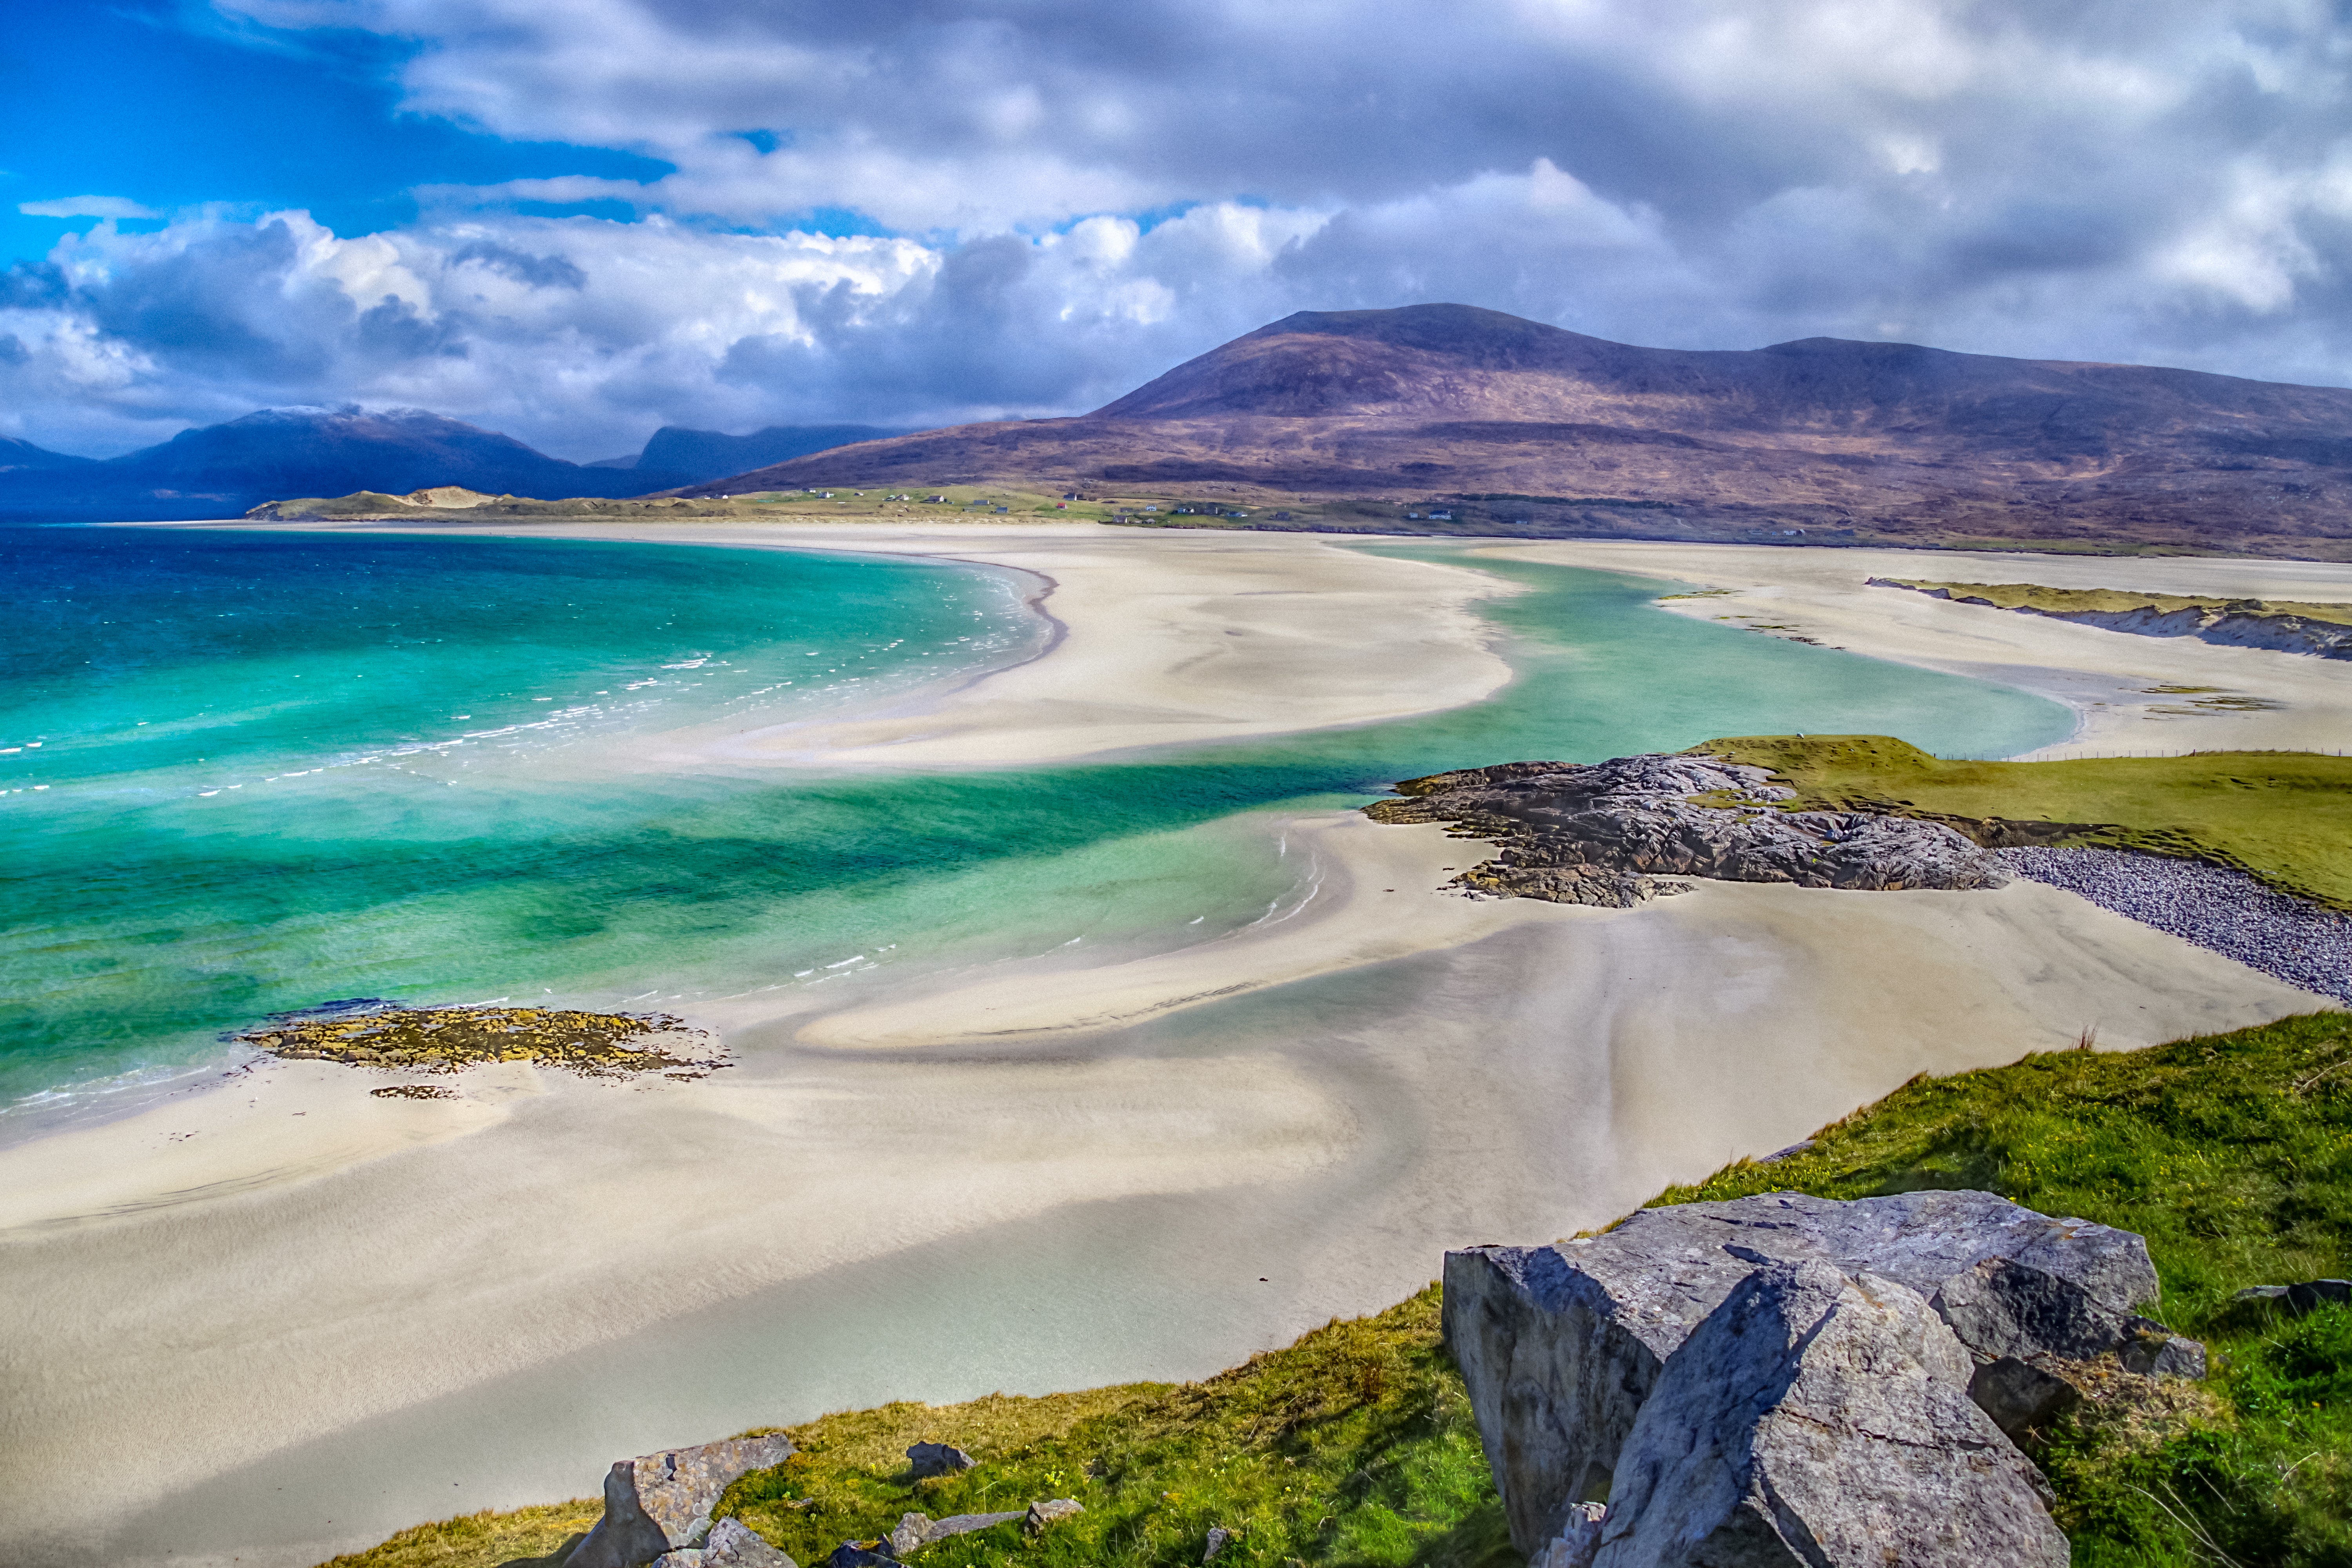 The emerald waters of the beaches of Luskentyre